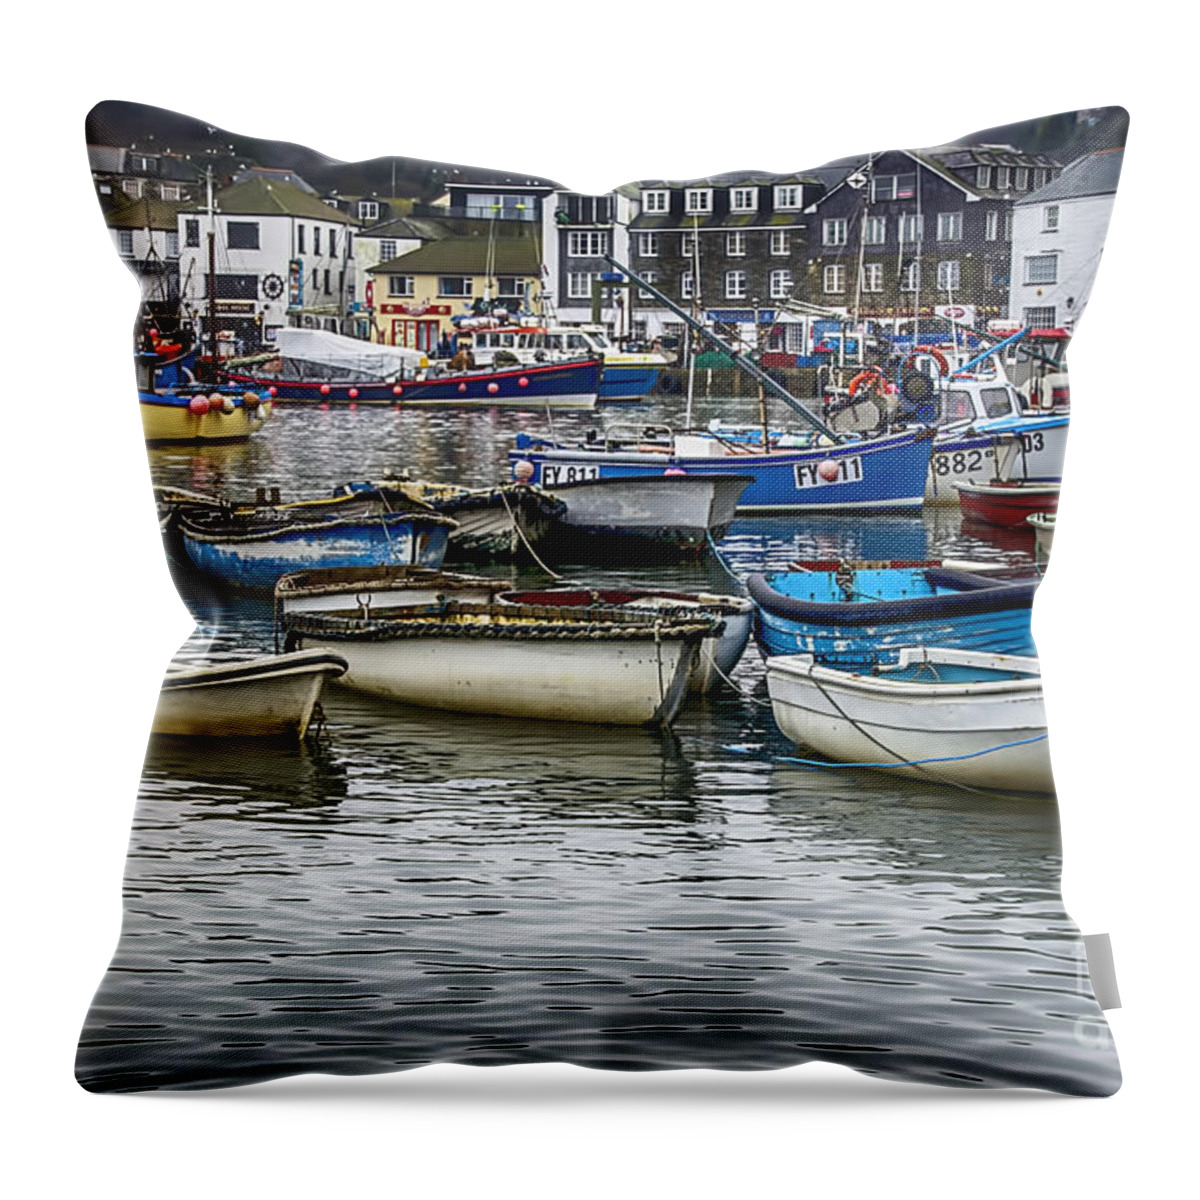 Mevagissy Harbour Throw Pillow featuring the photograph Mevagissy Harbour by Chris Thaxter